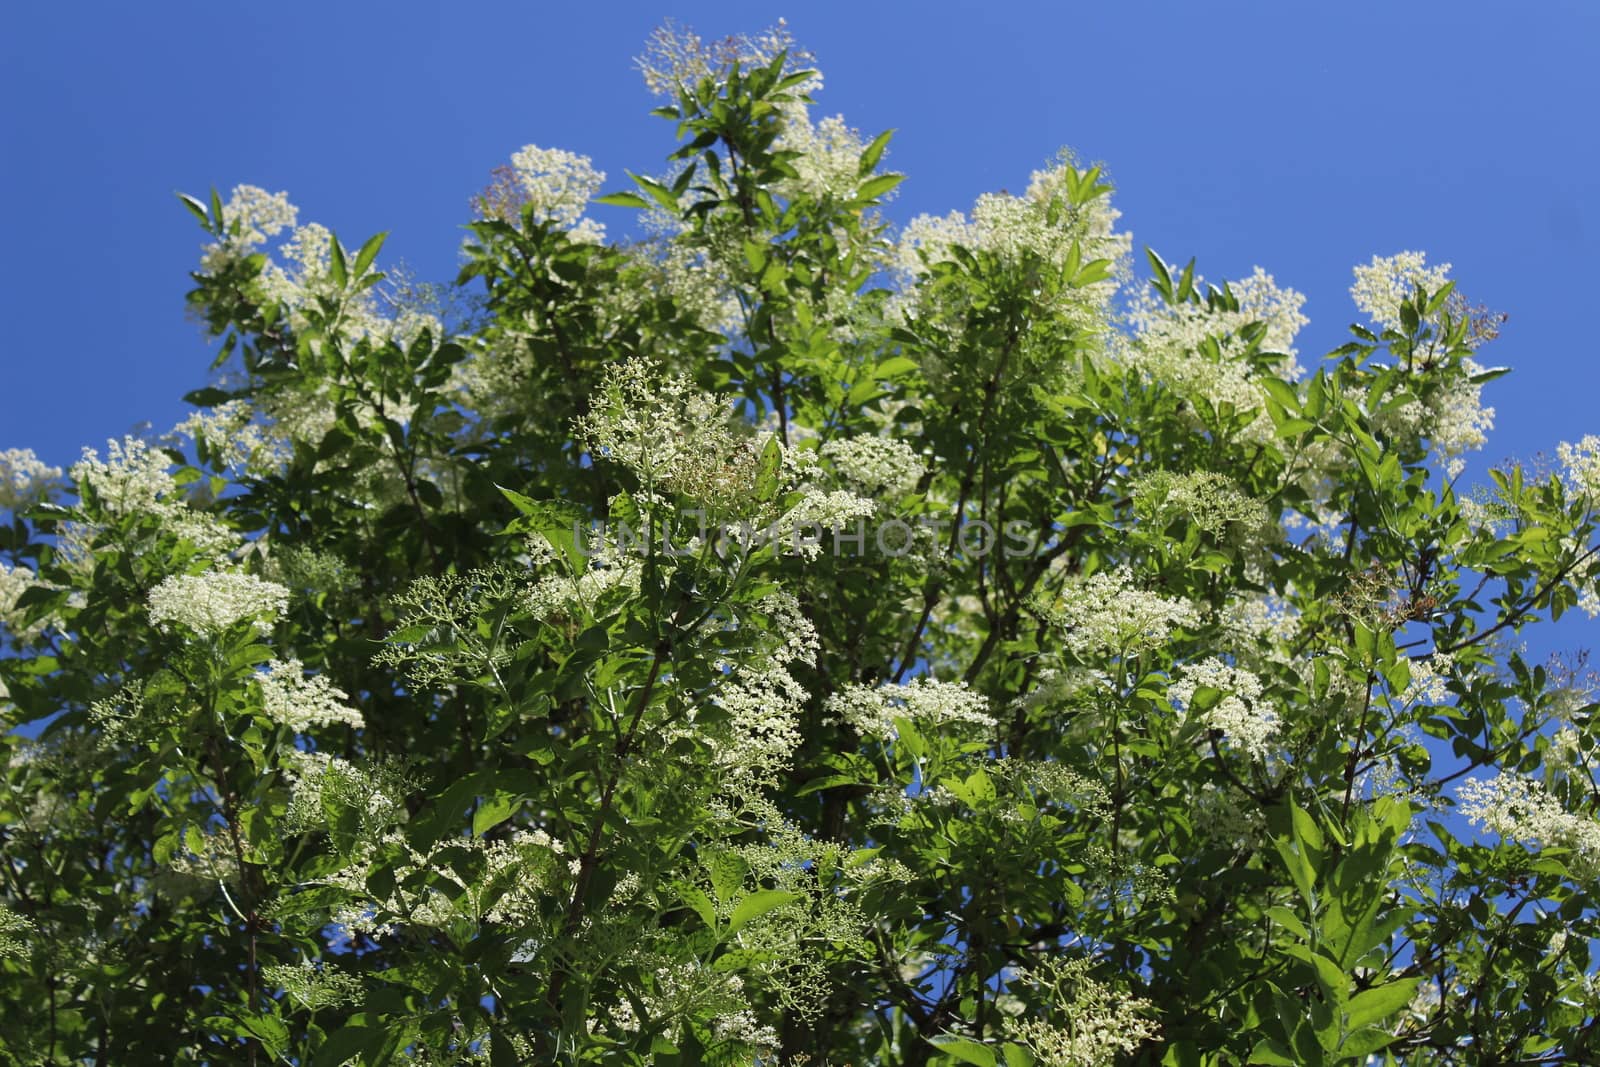 The picture shows elder with blossoms in the spring